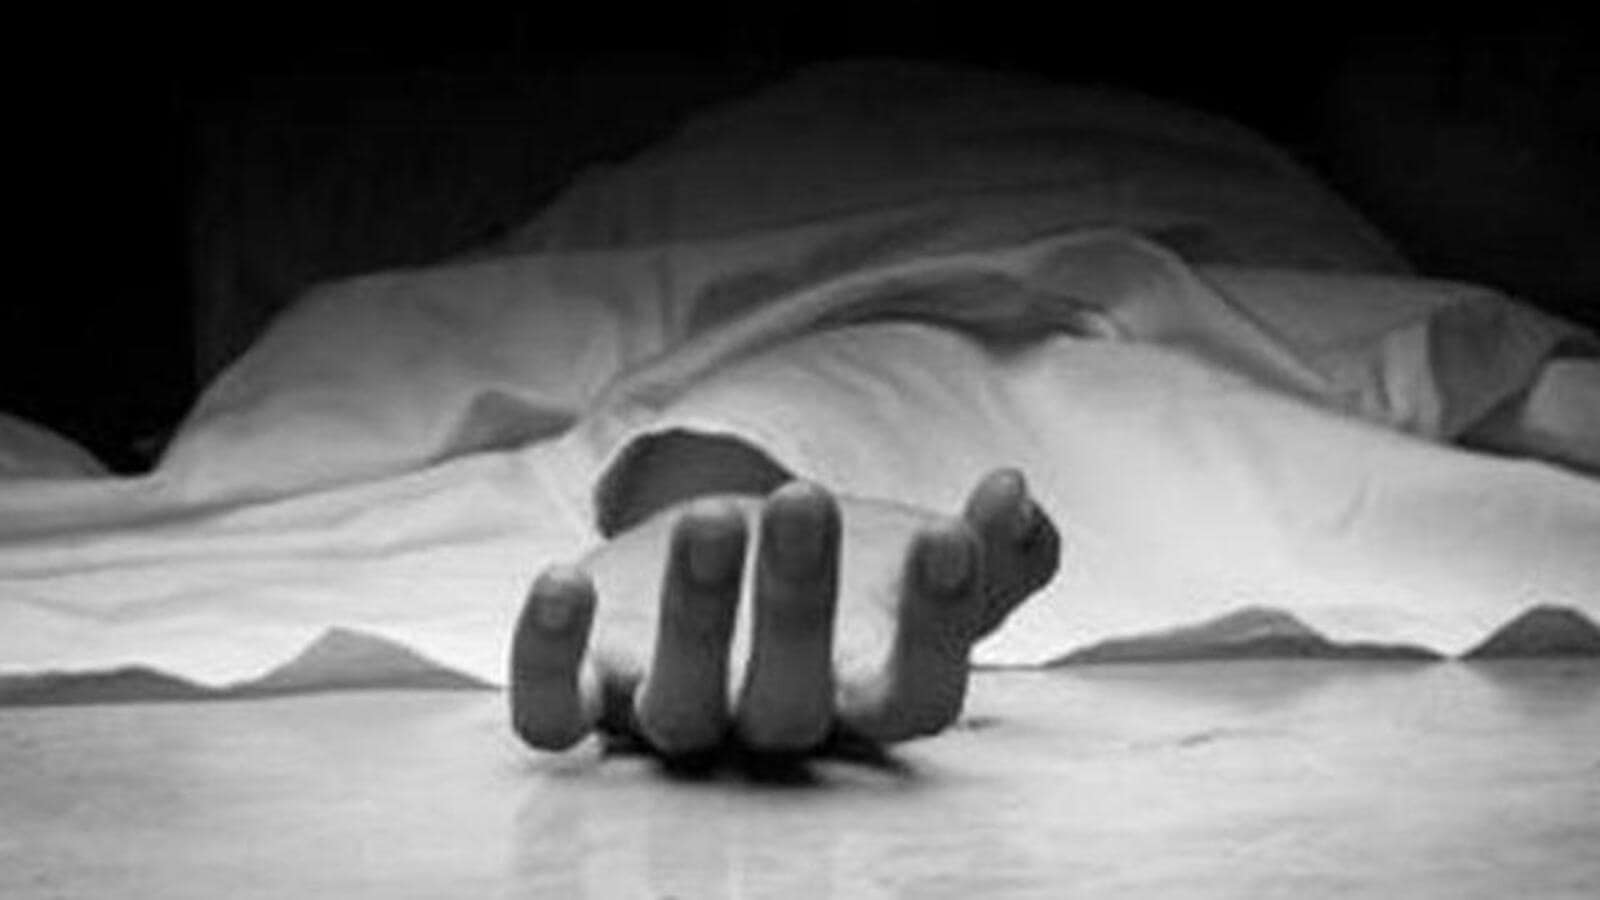 Panipat | 2 minor brothers electrocuted to death - Hindustan Times